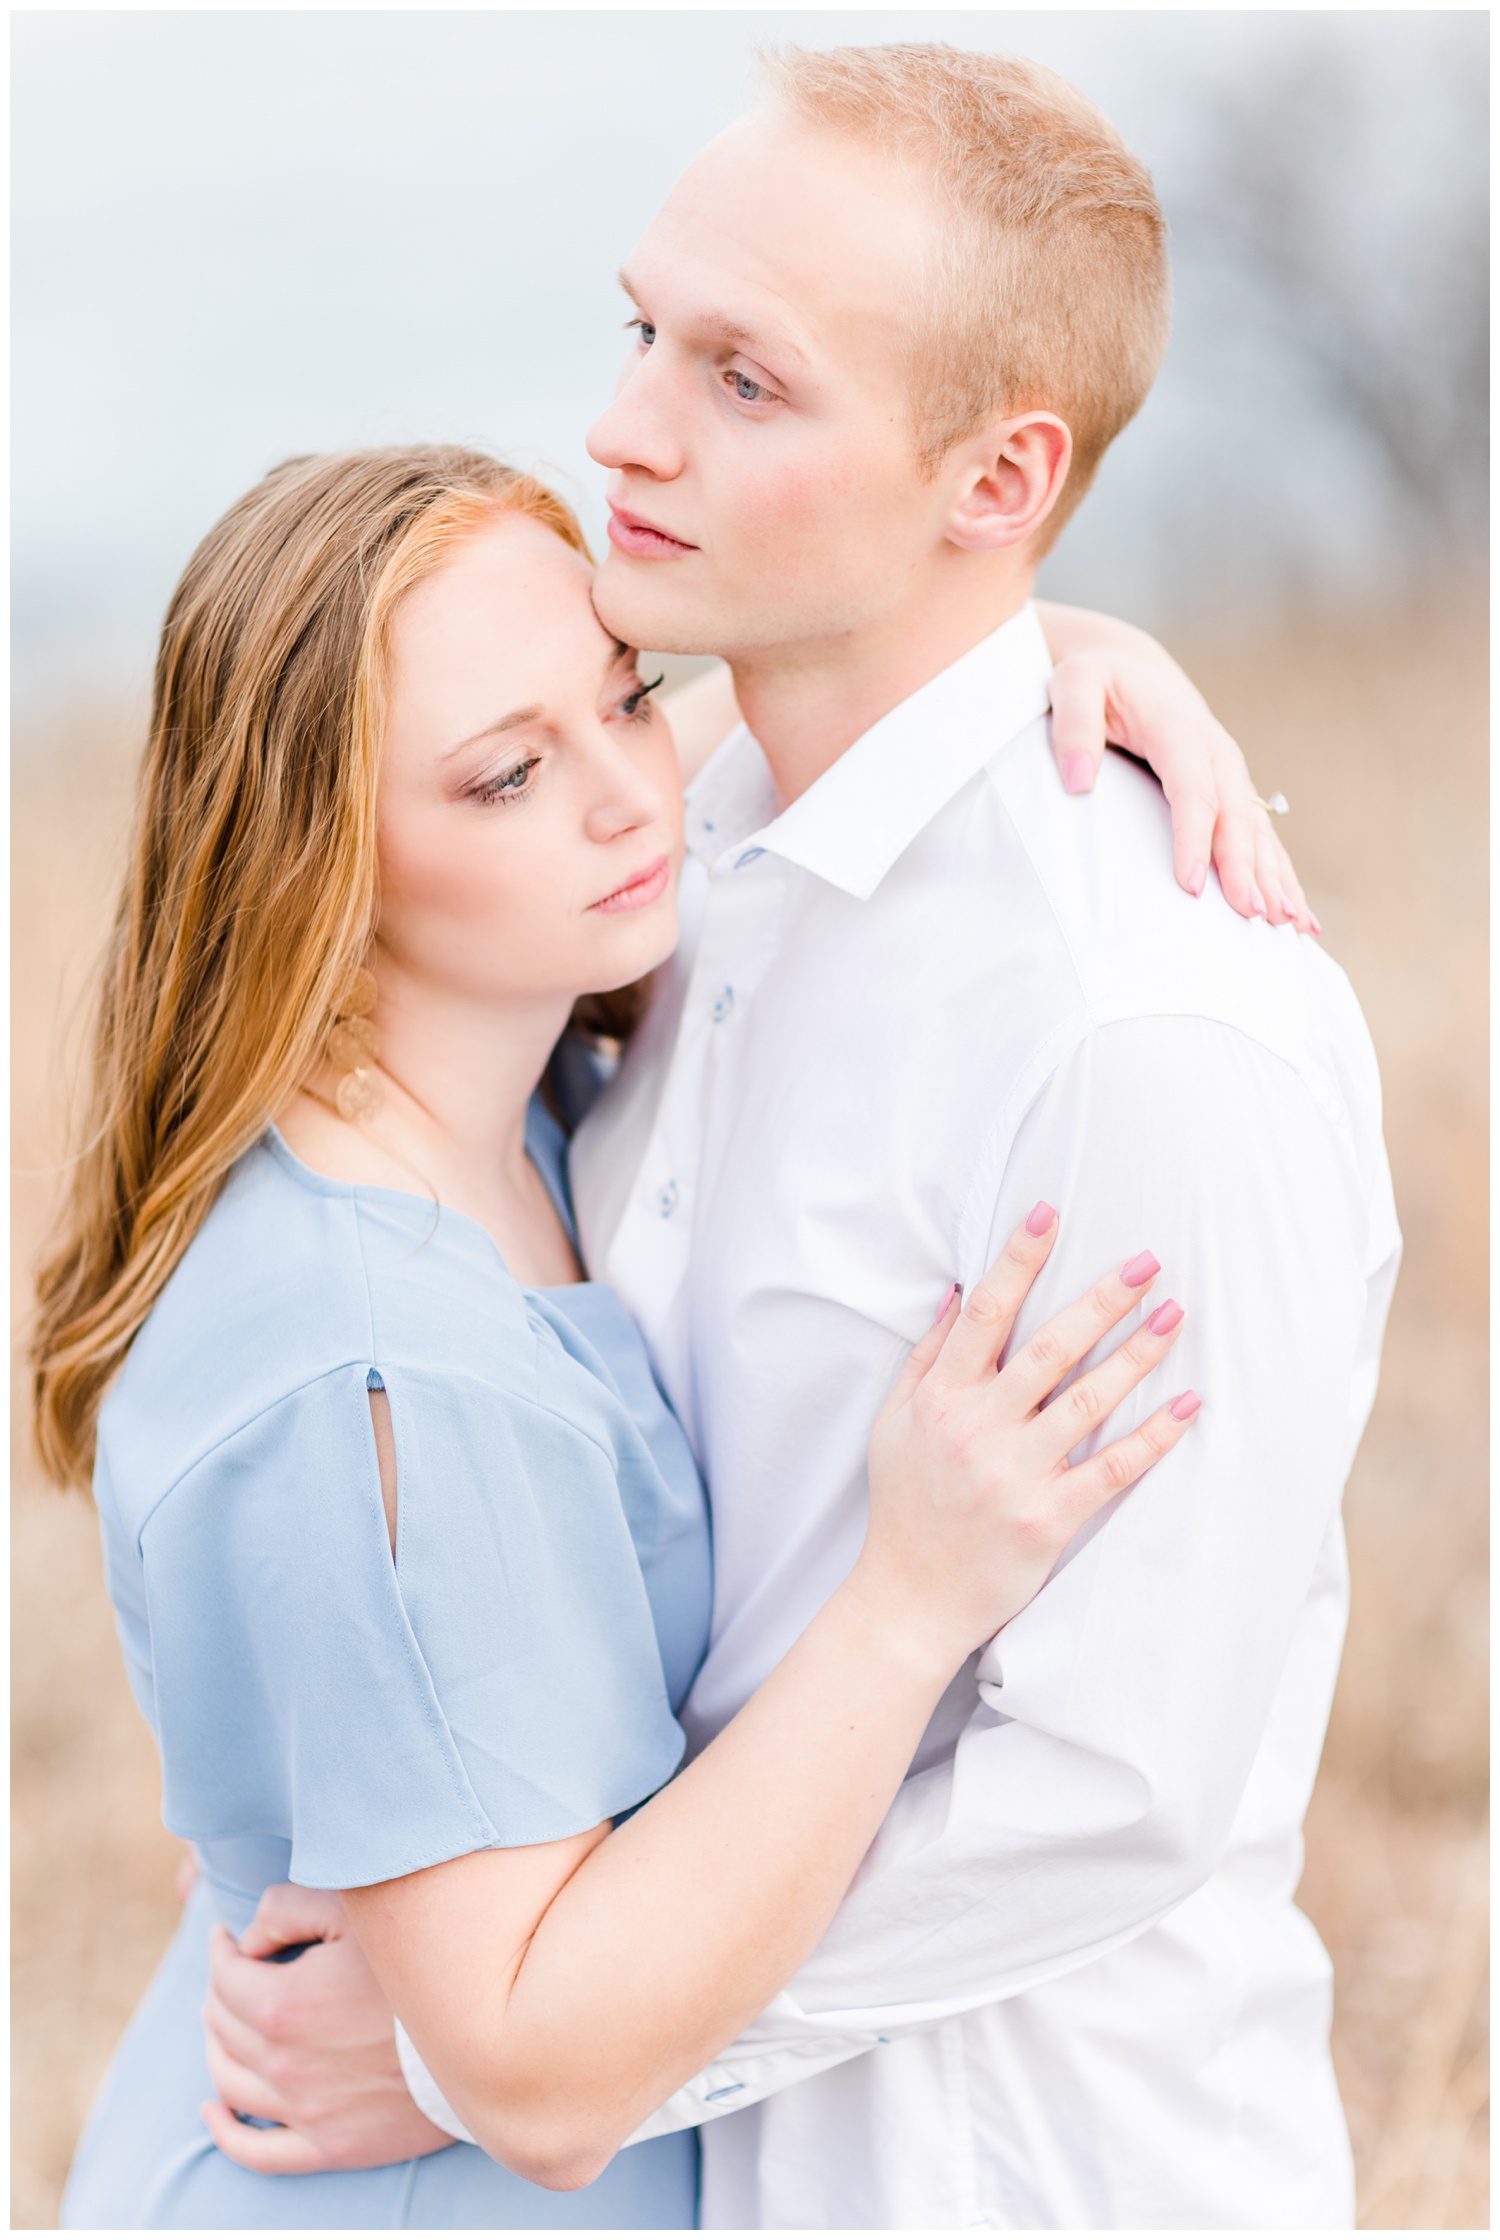 Brenna and Jacob embrace in the middle of a grassy field in front of a lake | CB Studio